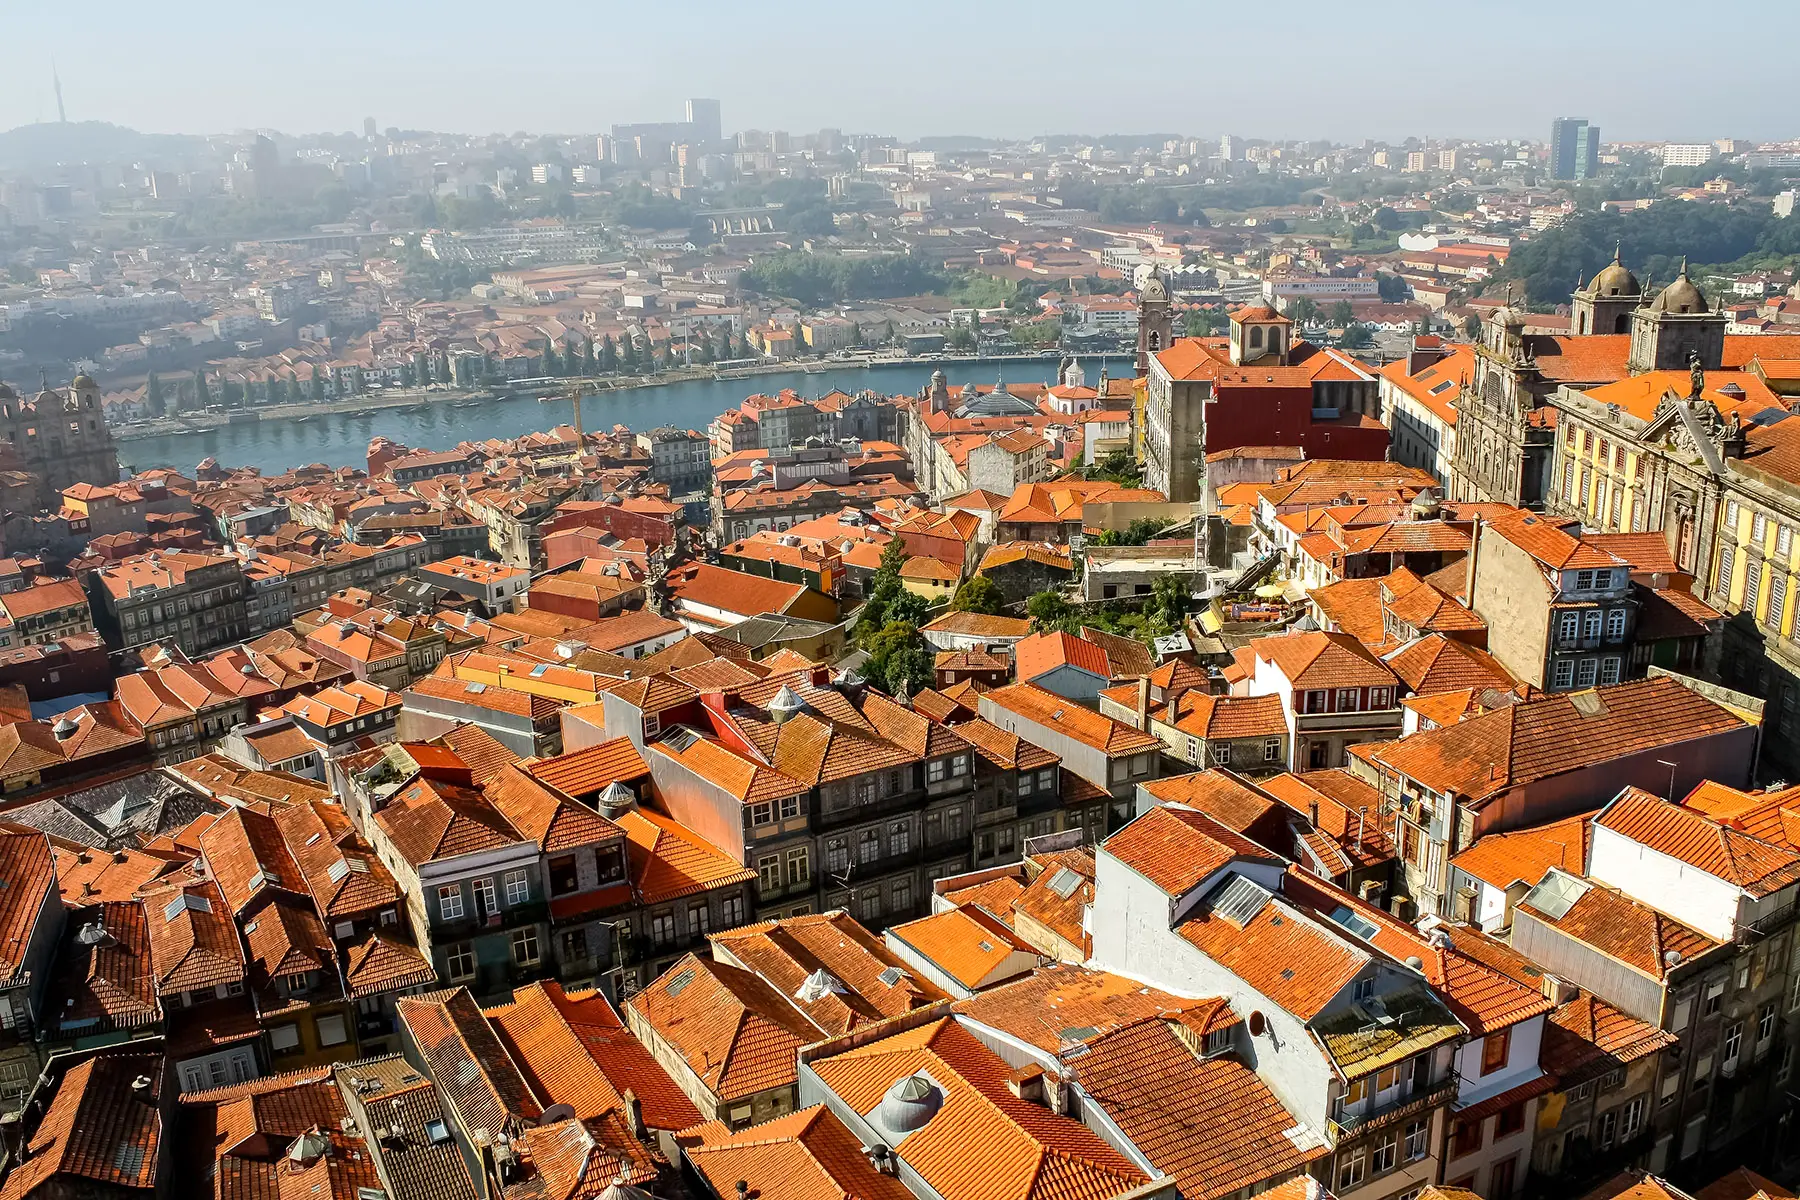 Typical houses in Porto, Portugal